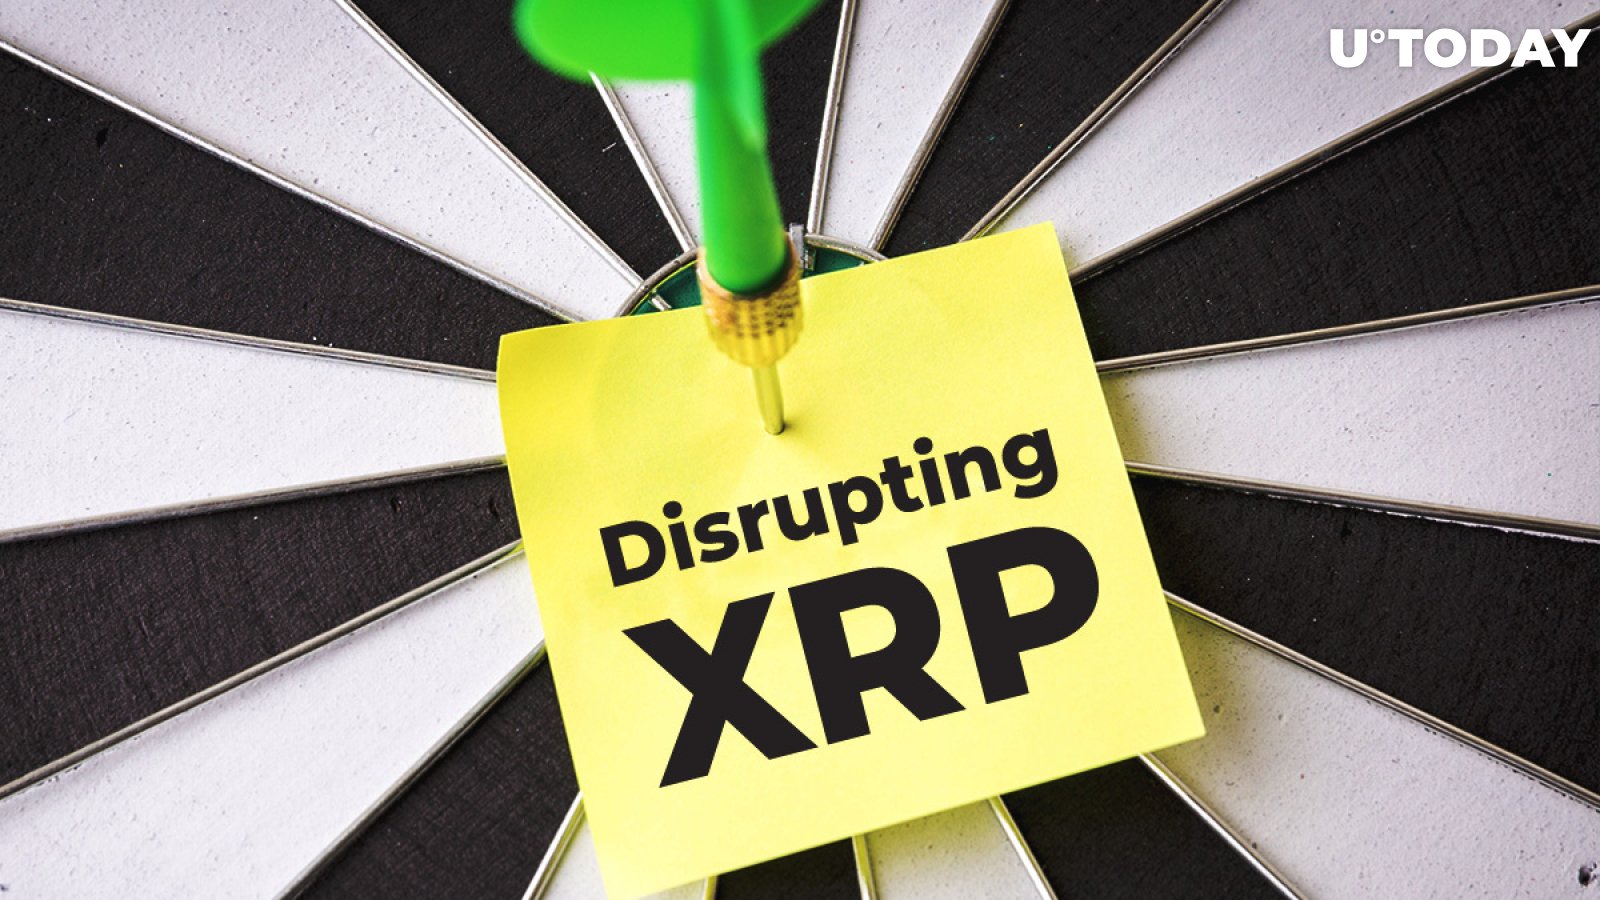 Disrupting XRP Wouldn't Be Logical for Ripple, Company's Exec Says